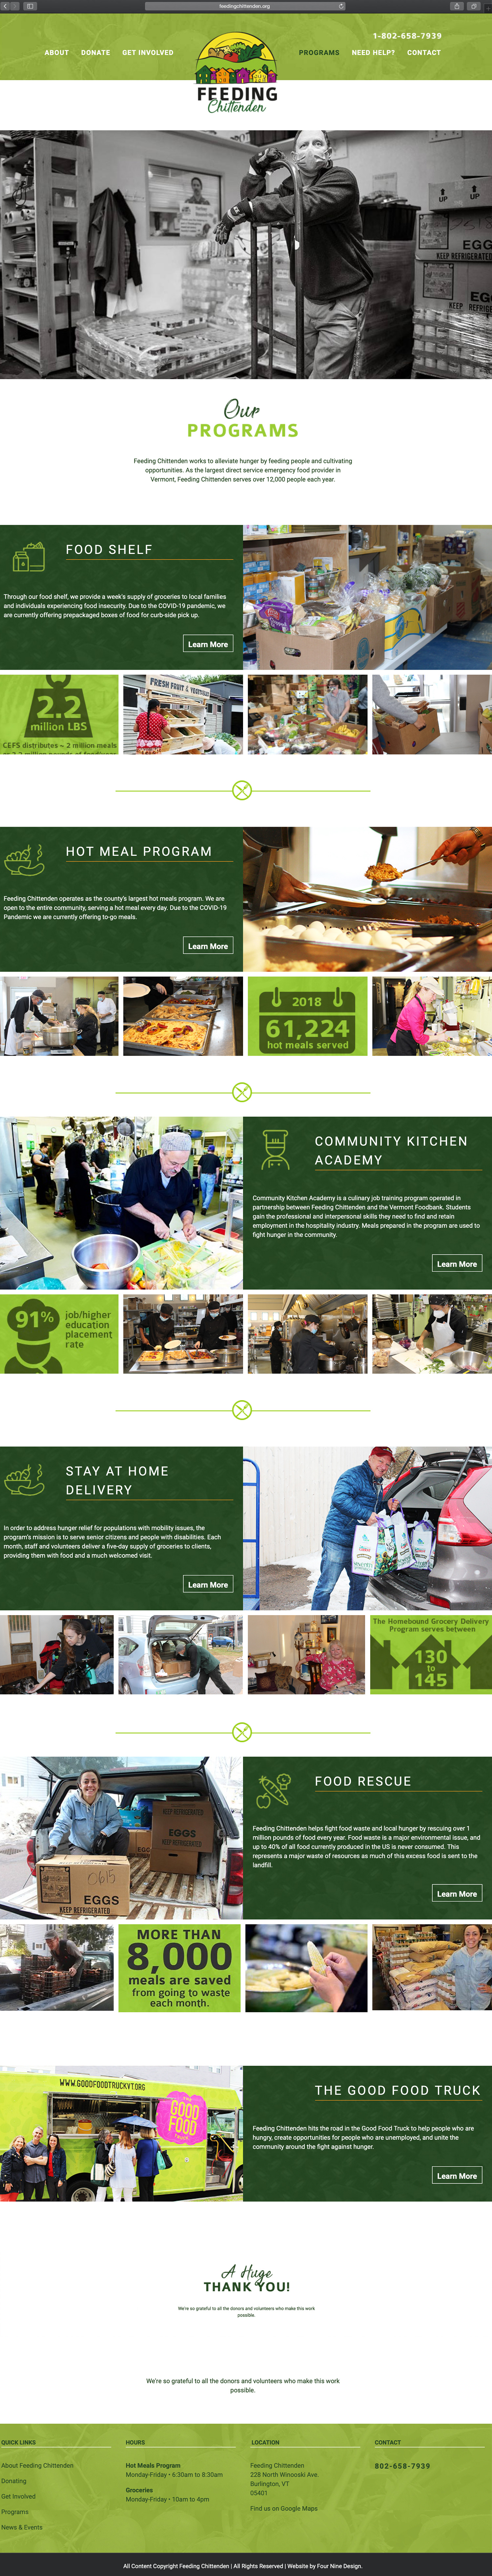 Website design and website development for Feeding Chittenden - secondary page view.